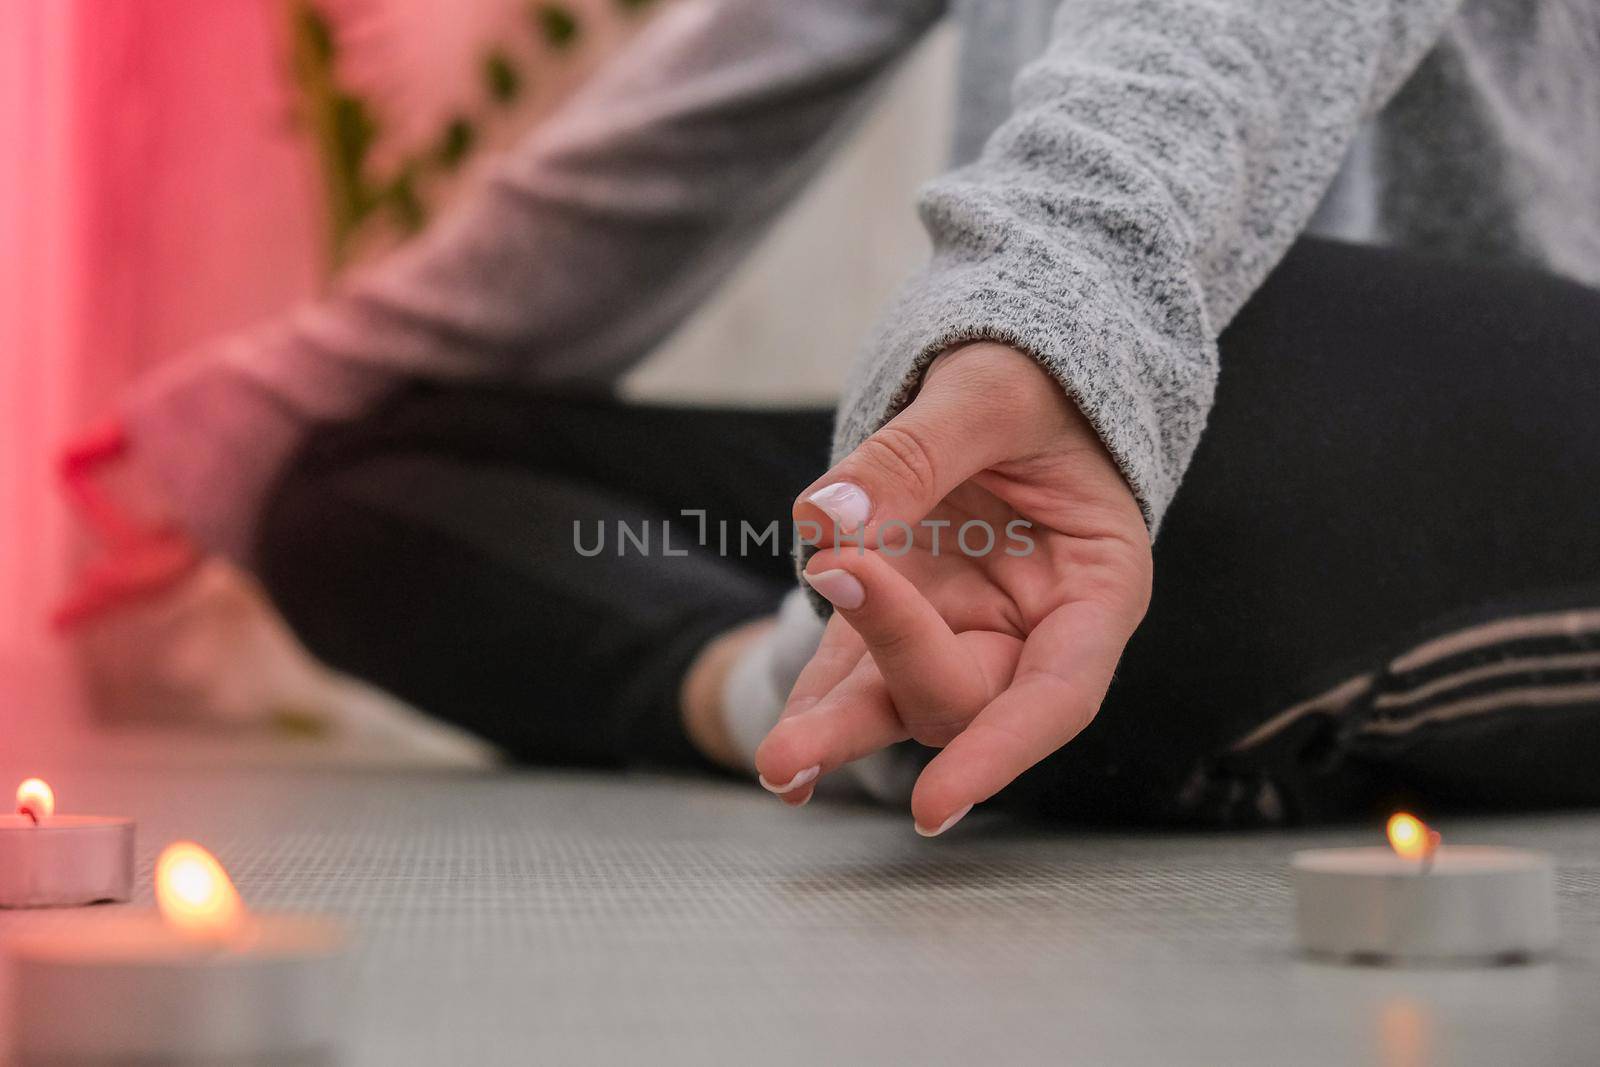 Close-up. Woman doing yoga exercise at home. Mindfulness meditation. Relax breathe easy pose gym healthy lifestyle concept. Burning candles light. Lotus asana. Atmosphere of relax and zen. Exercise to reach clarity of mind and perfect body. Padmasana